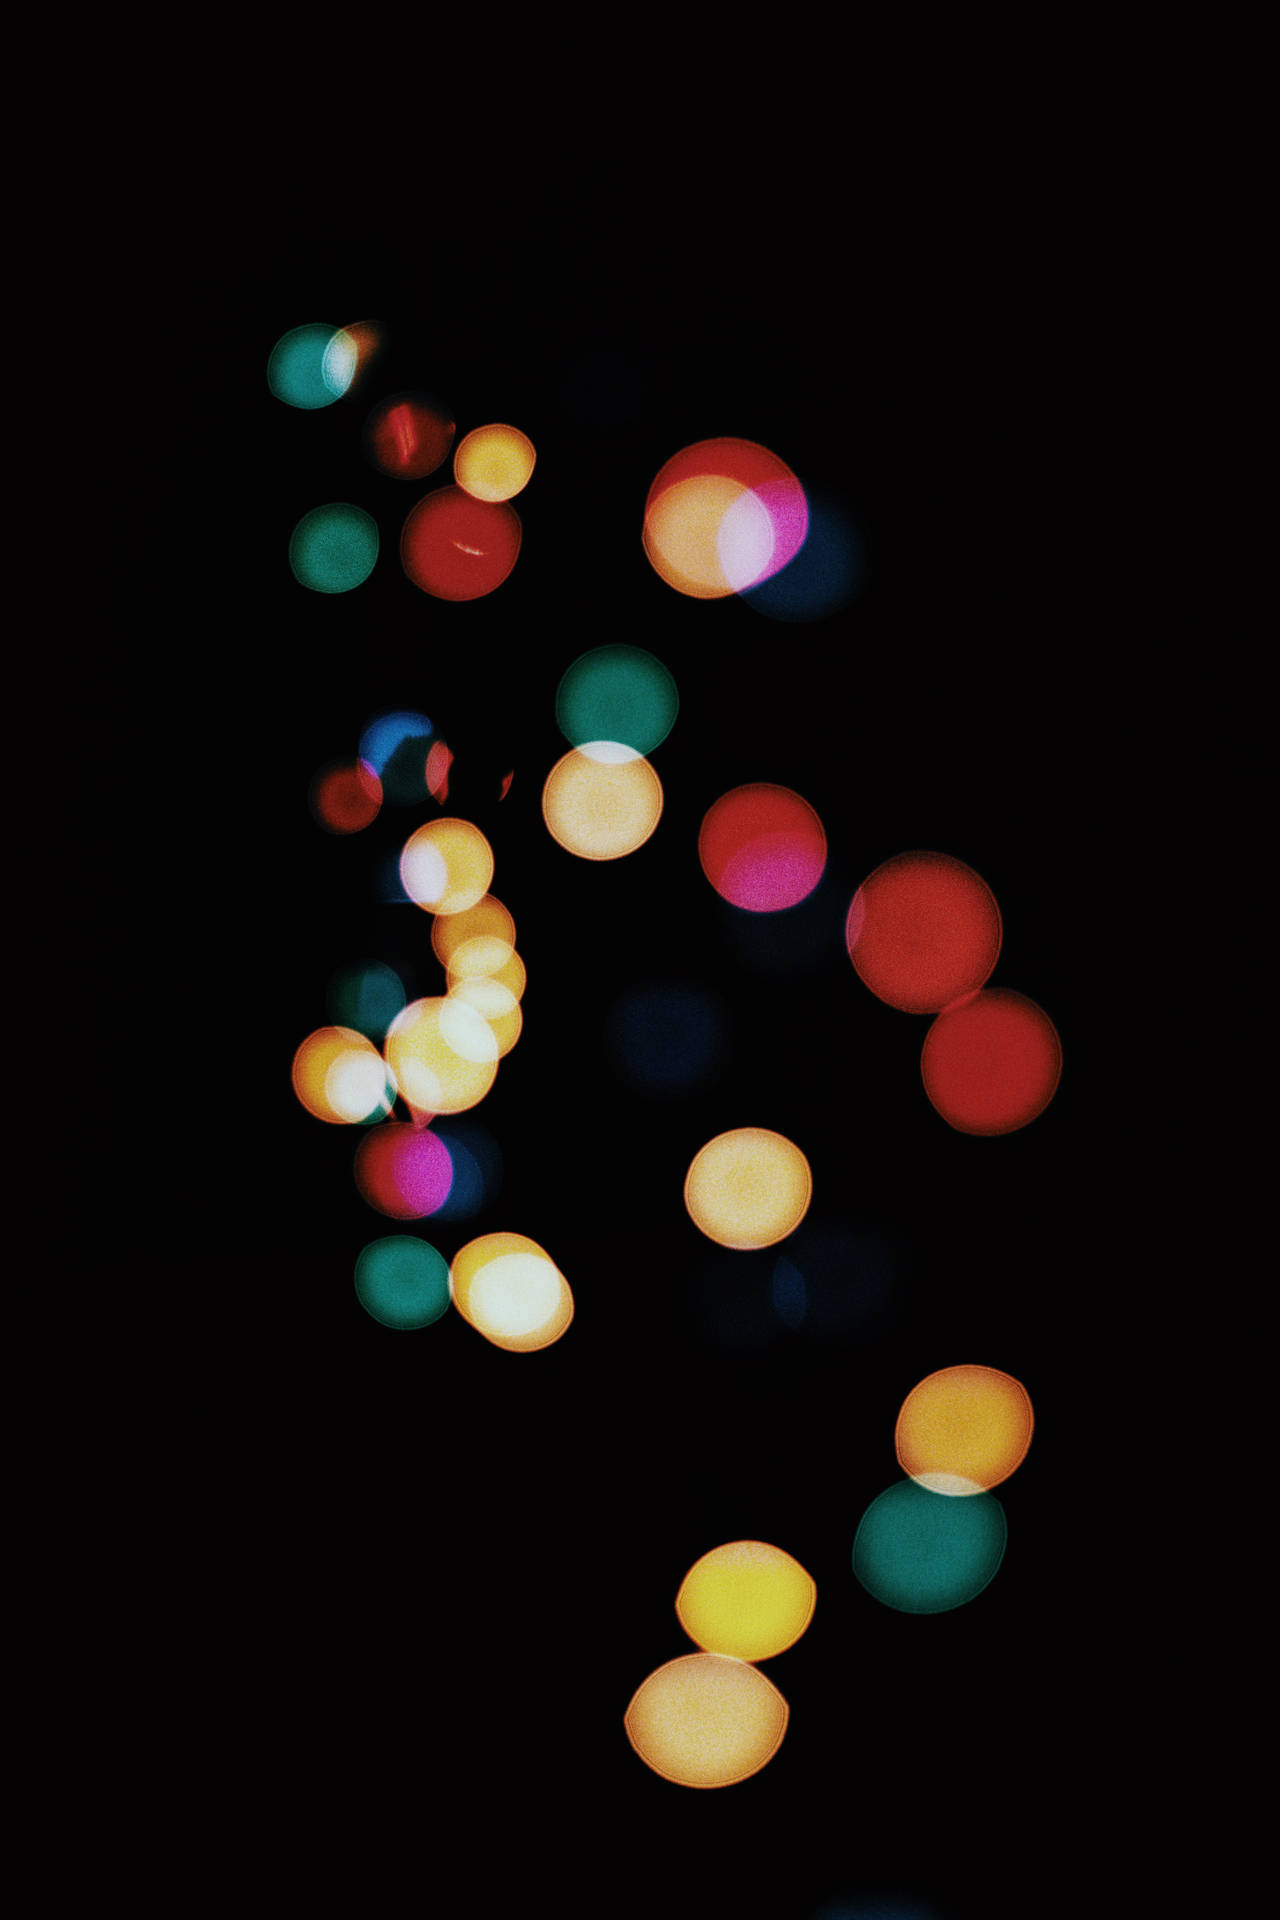 Iphone Home Screen Colorful Light Orbs Wallpaper